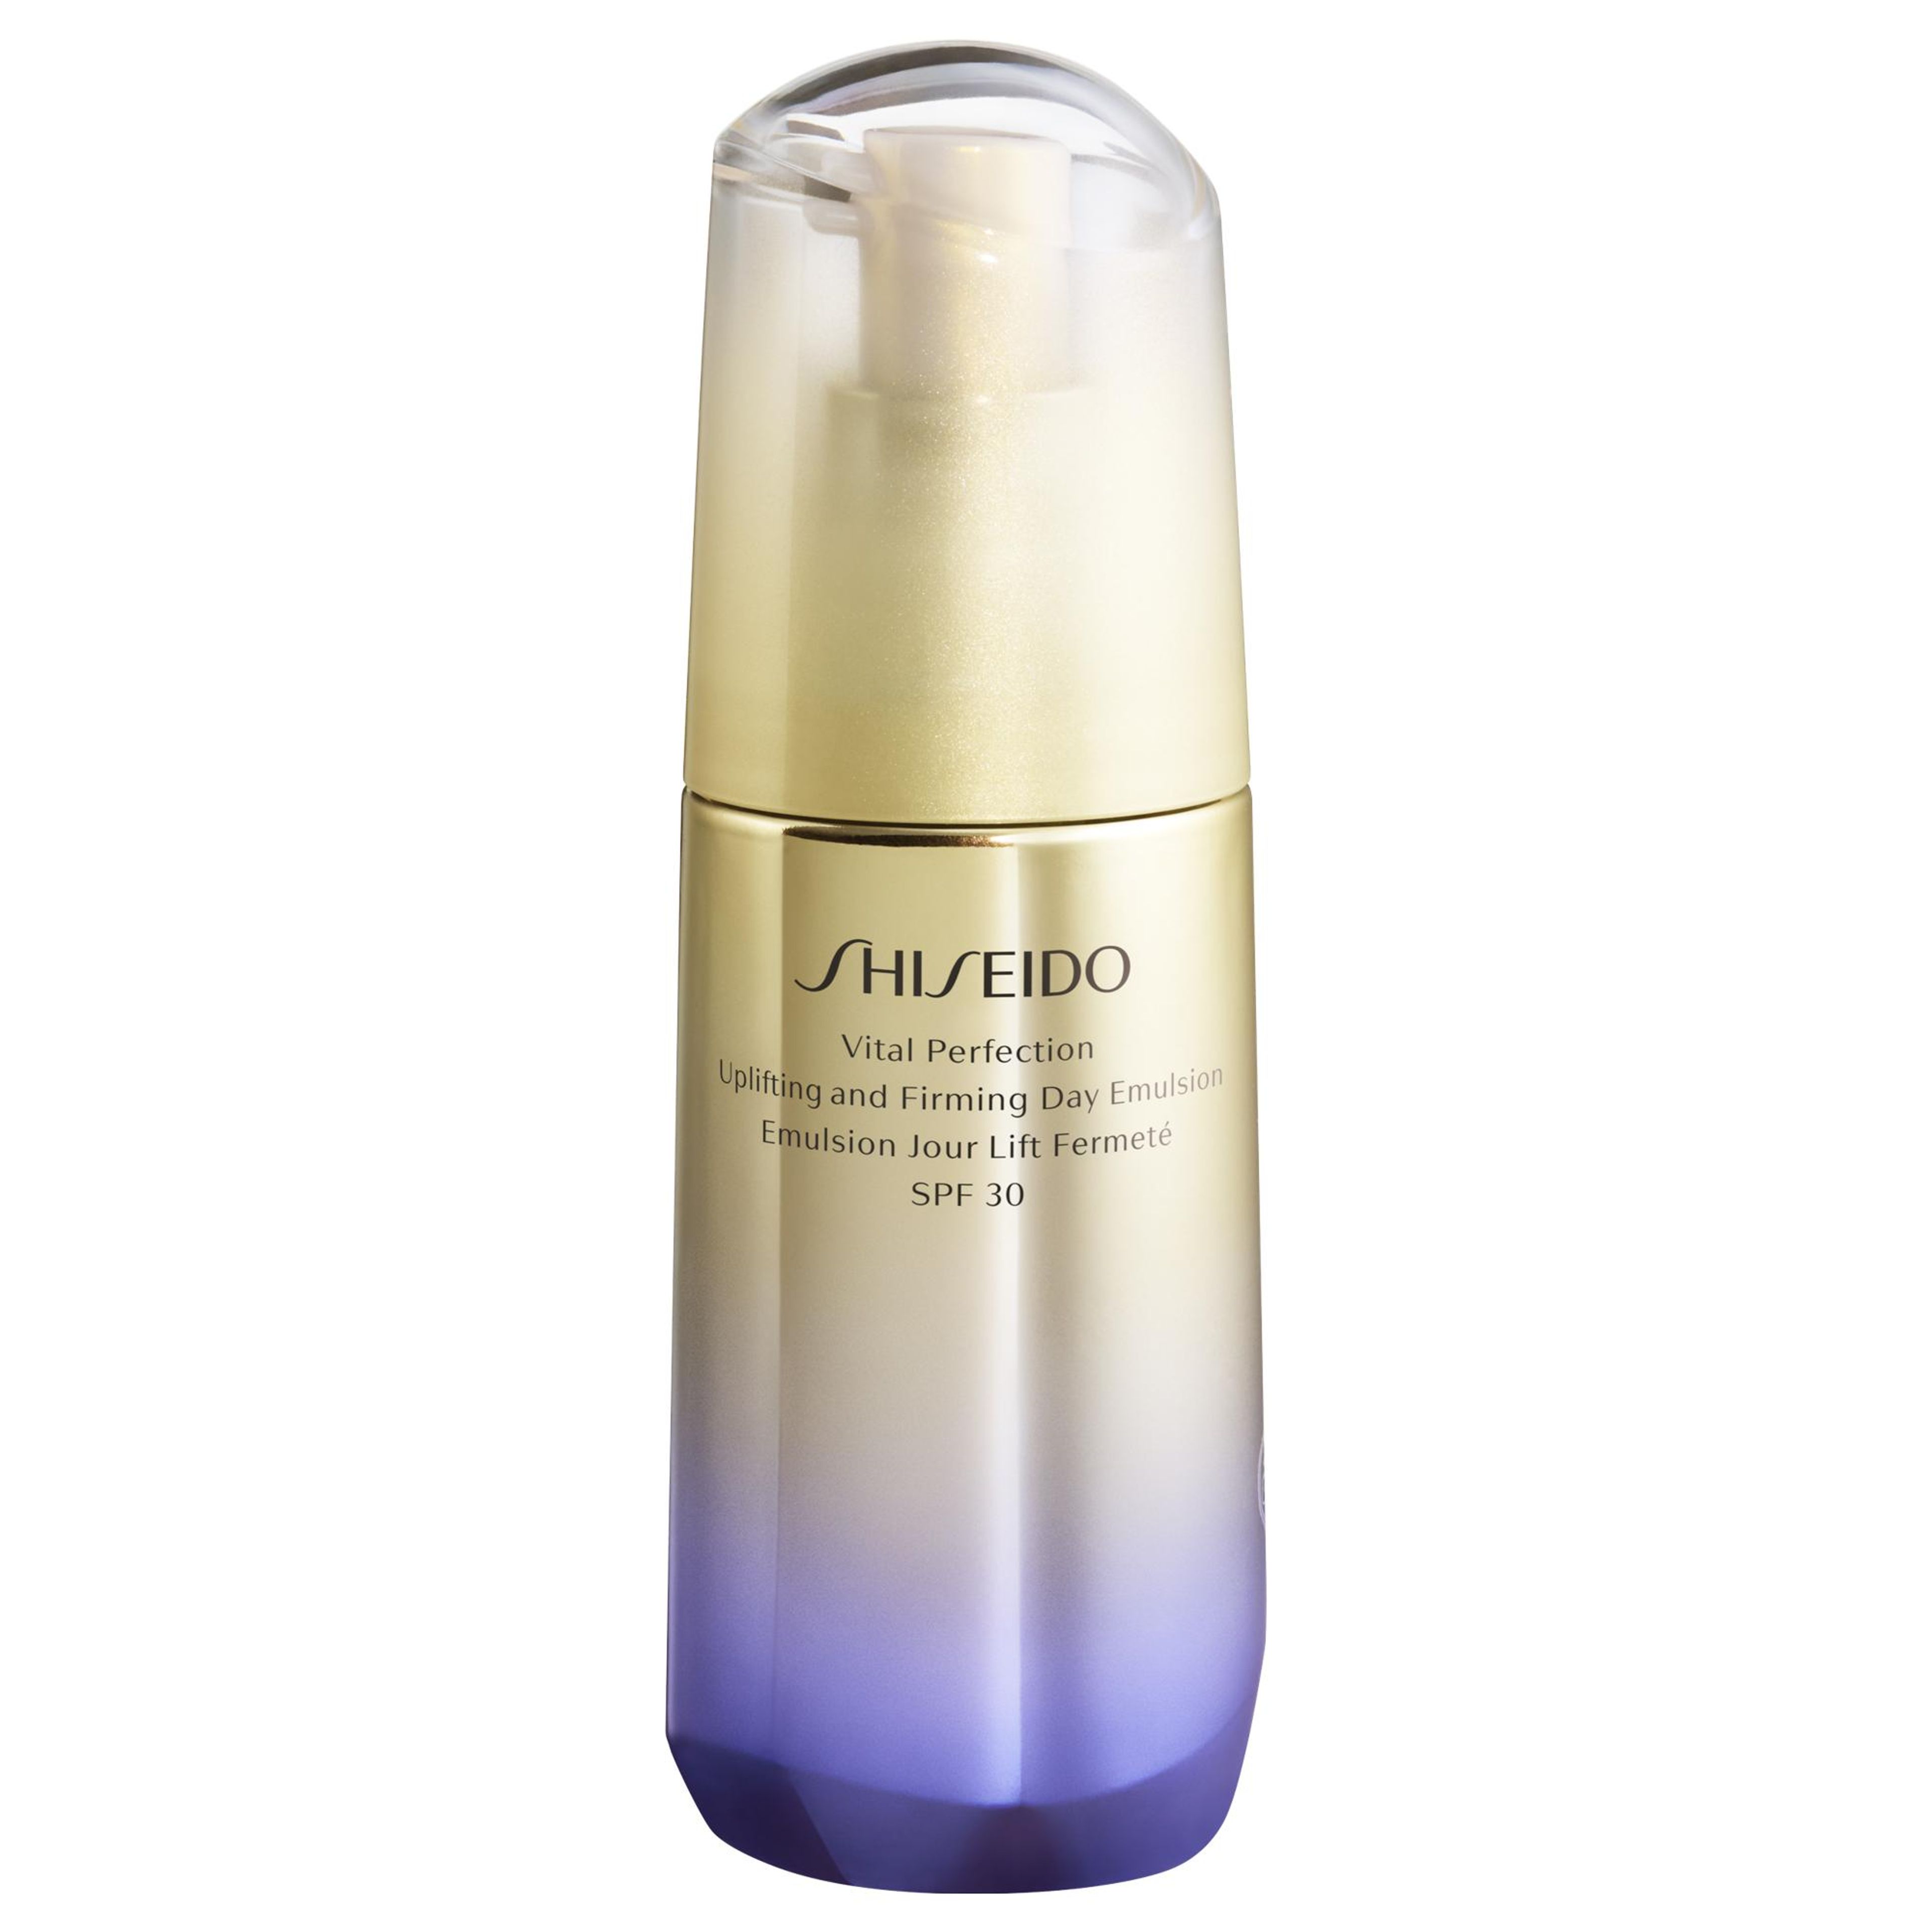 Uplifting And Firming Day Emulsion Shiseido 1